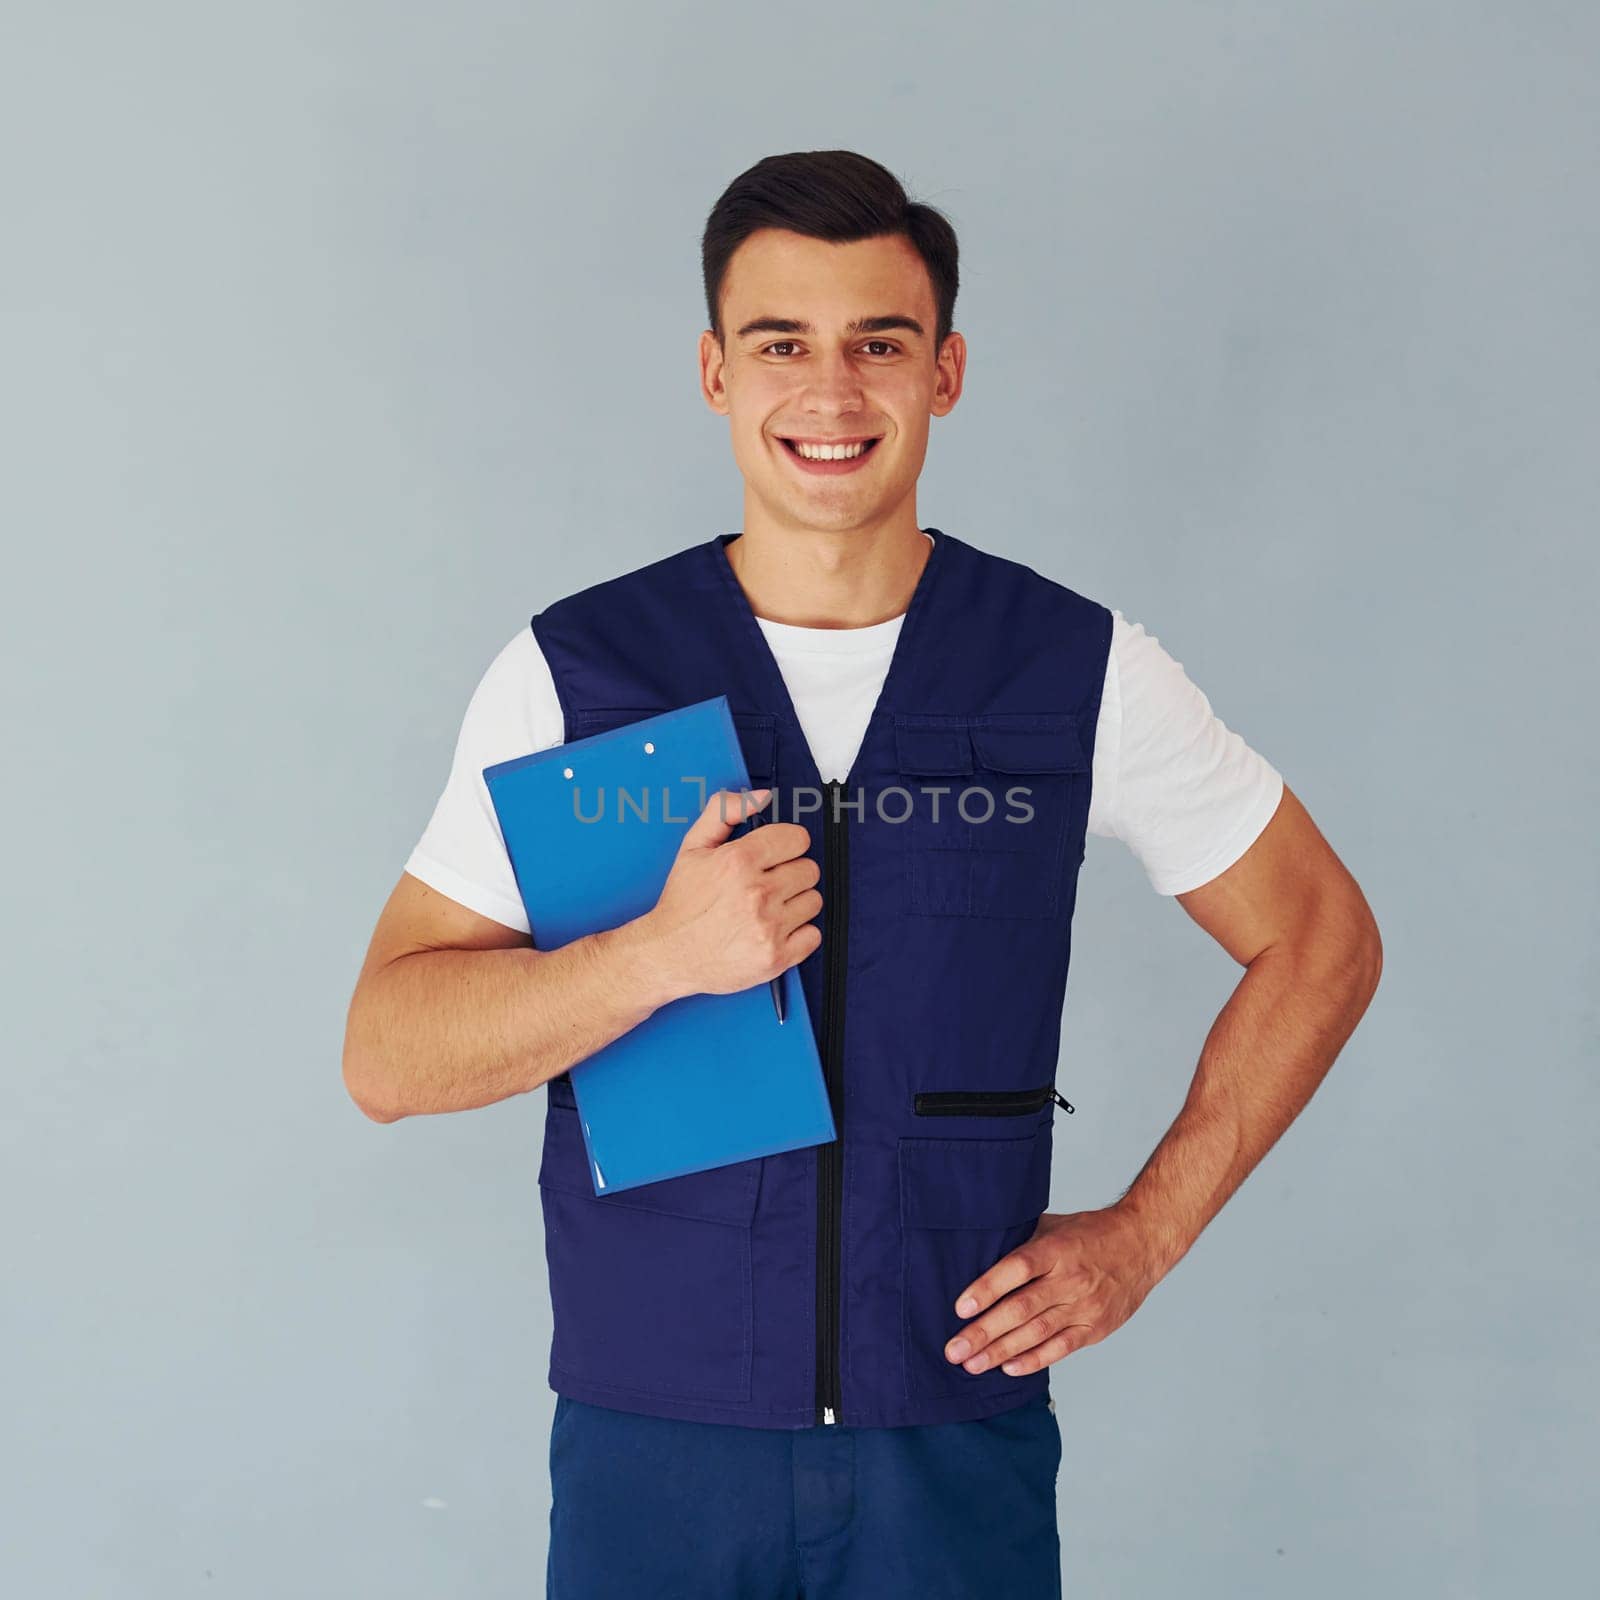 Holds notepad. Male worker in blue uniform standing inside of studio against white background.